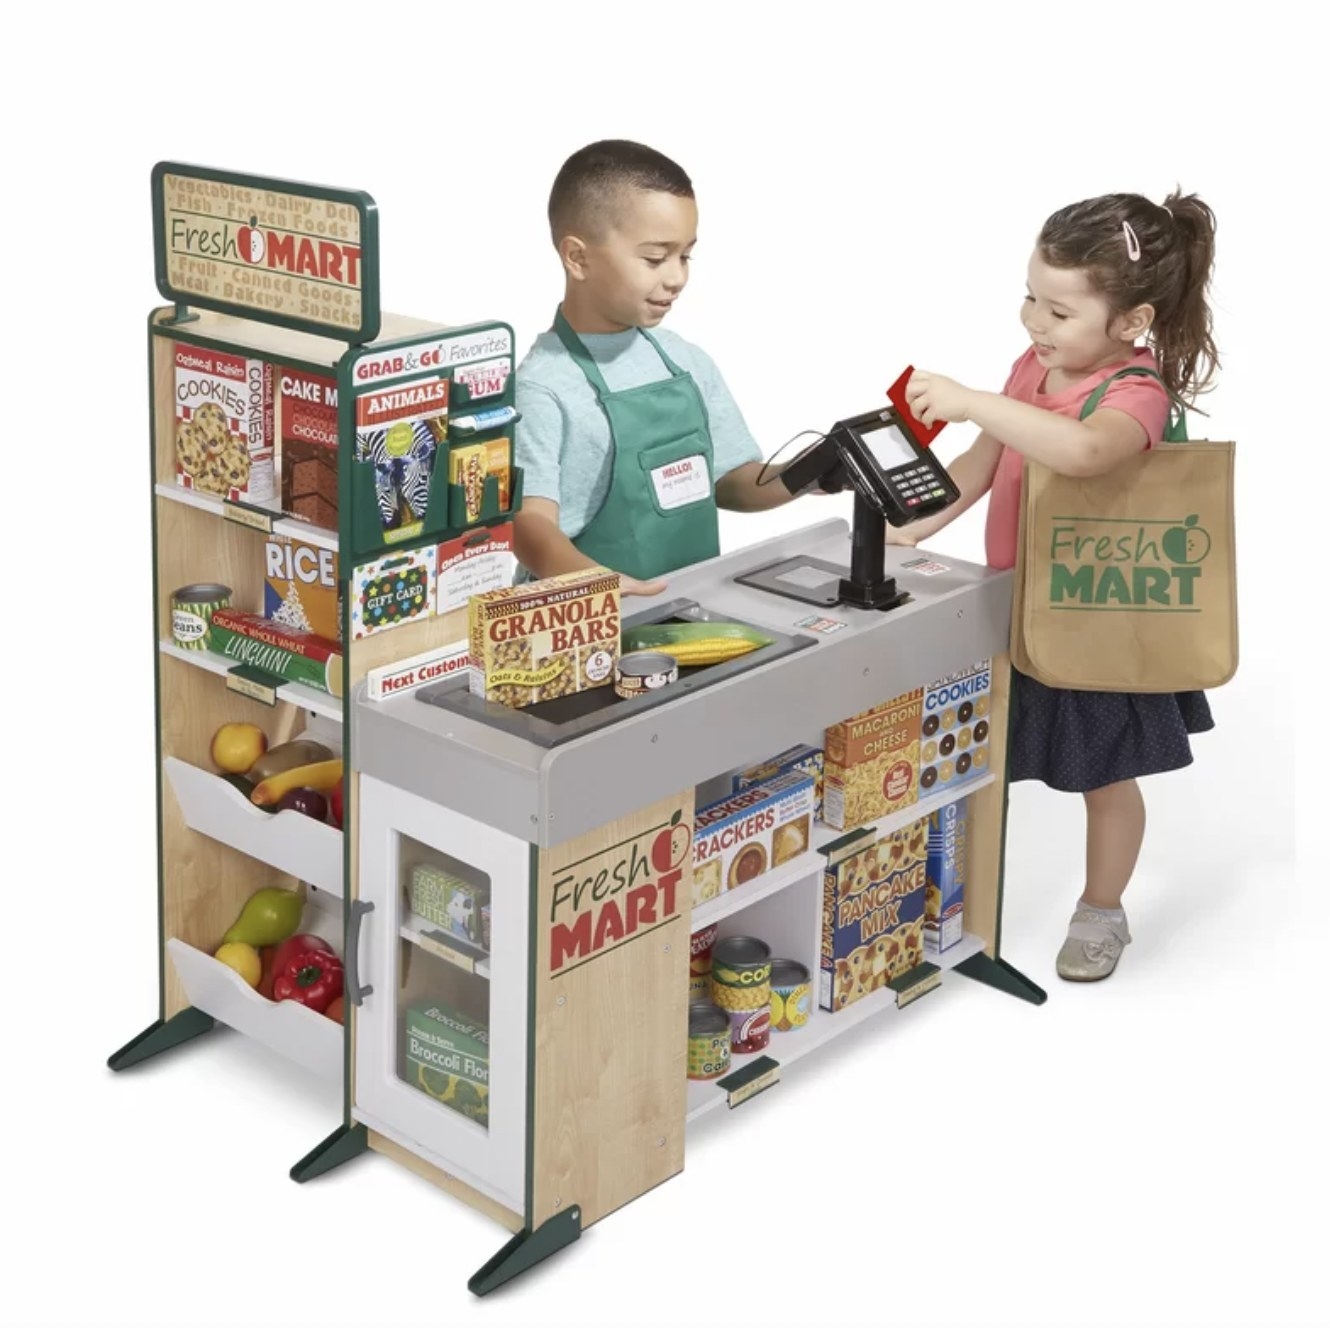 Grocery store play set